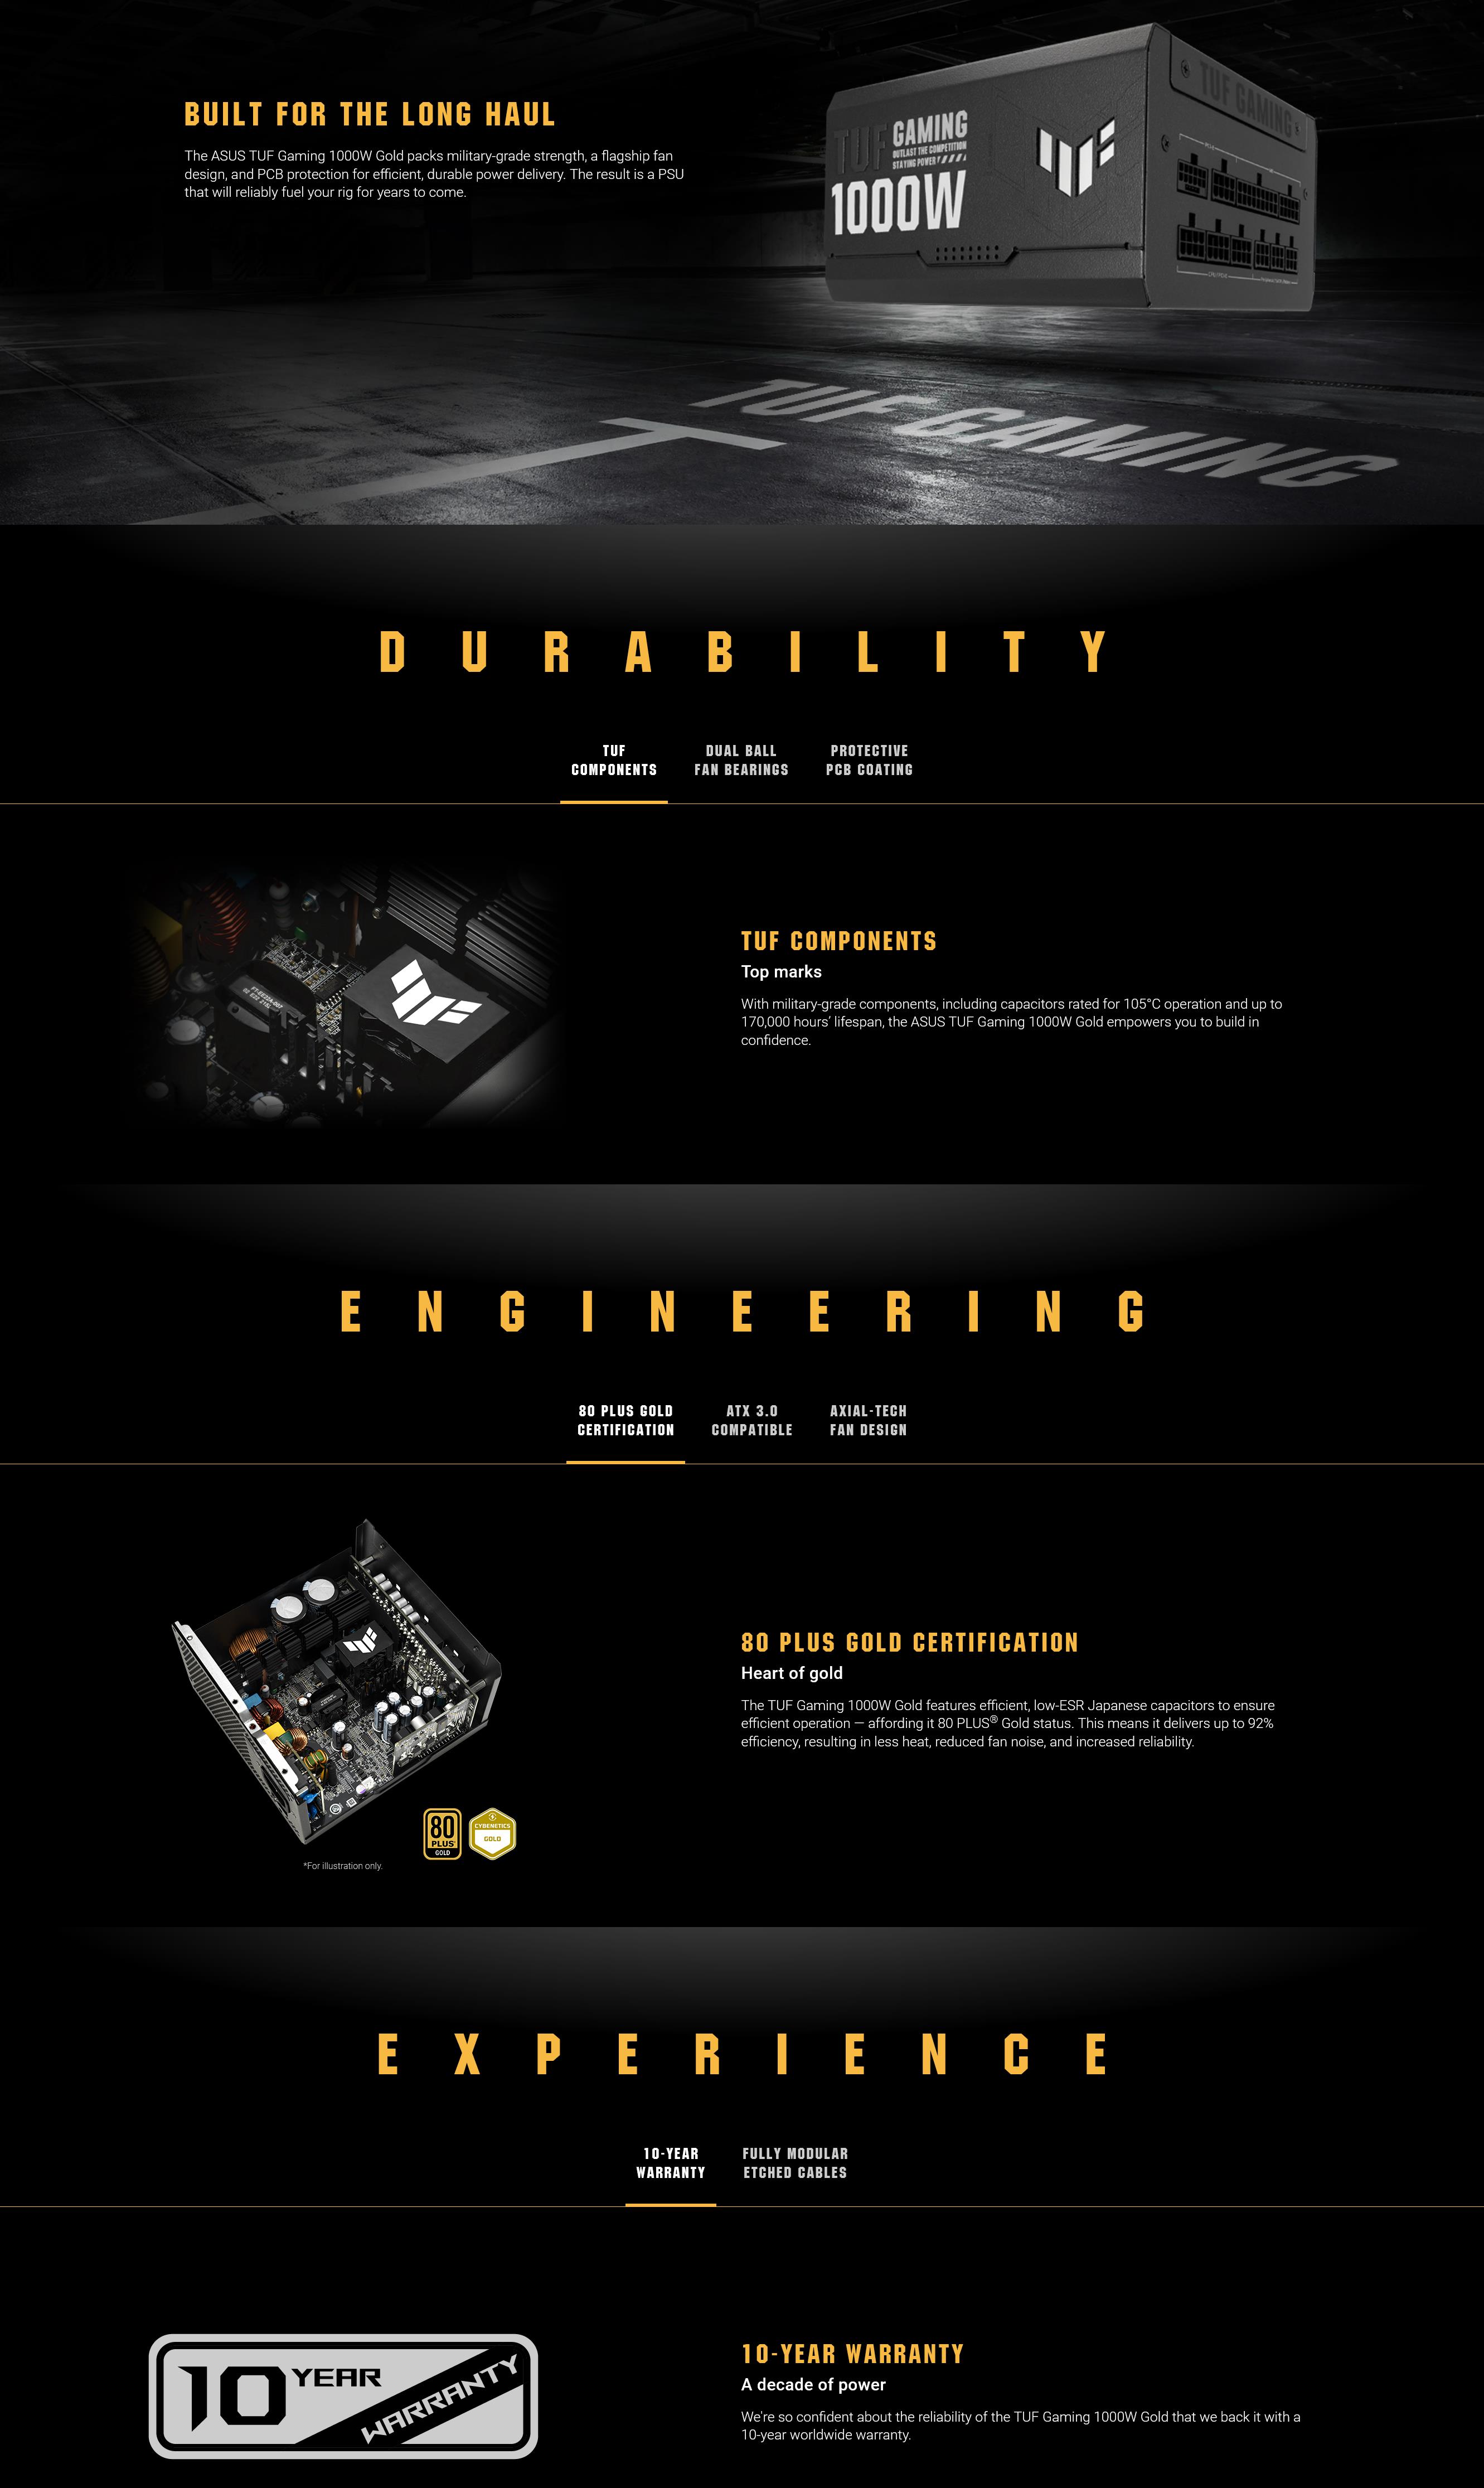 A large marketing image providing additional information about the product ASUS TUF Gaming 1000W Gold ATX Modular PSU - Additional alt info not provided